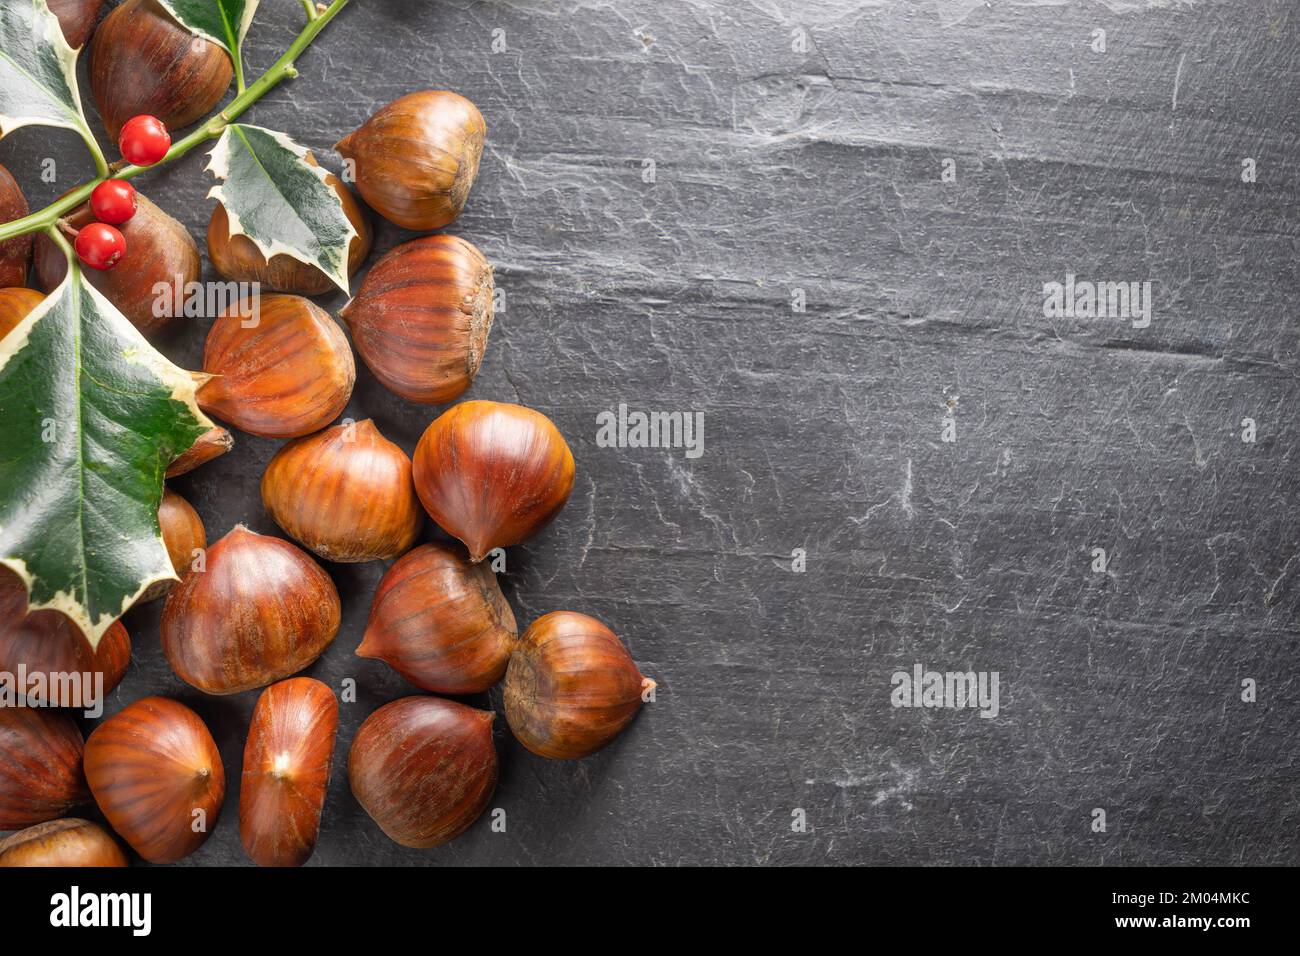 Chestnuts with Christmas holly Stock Photo